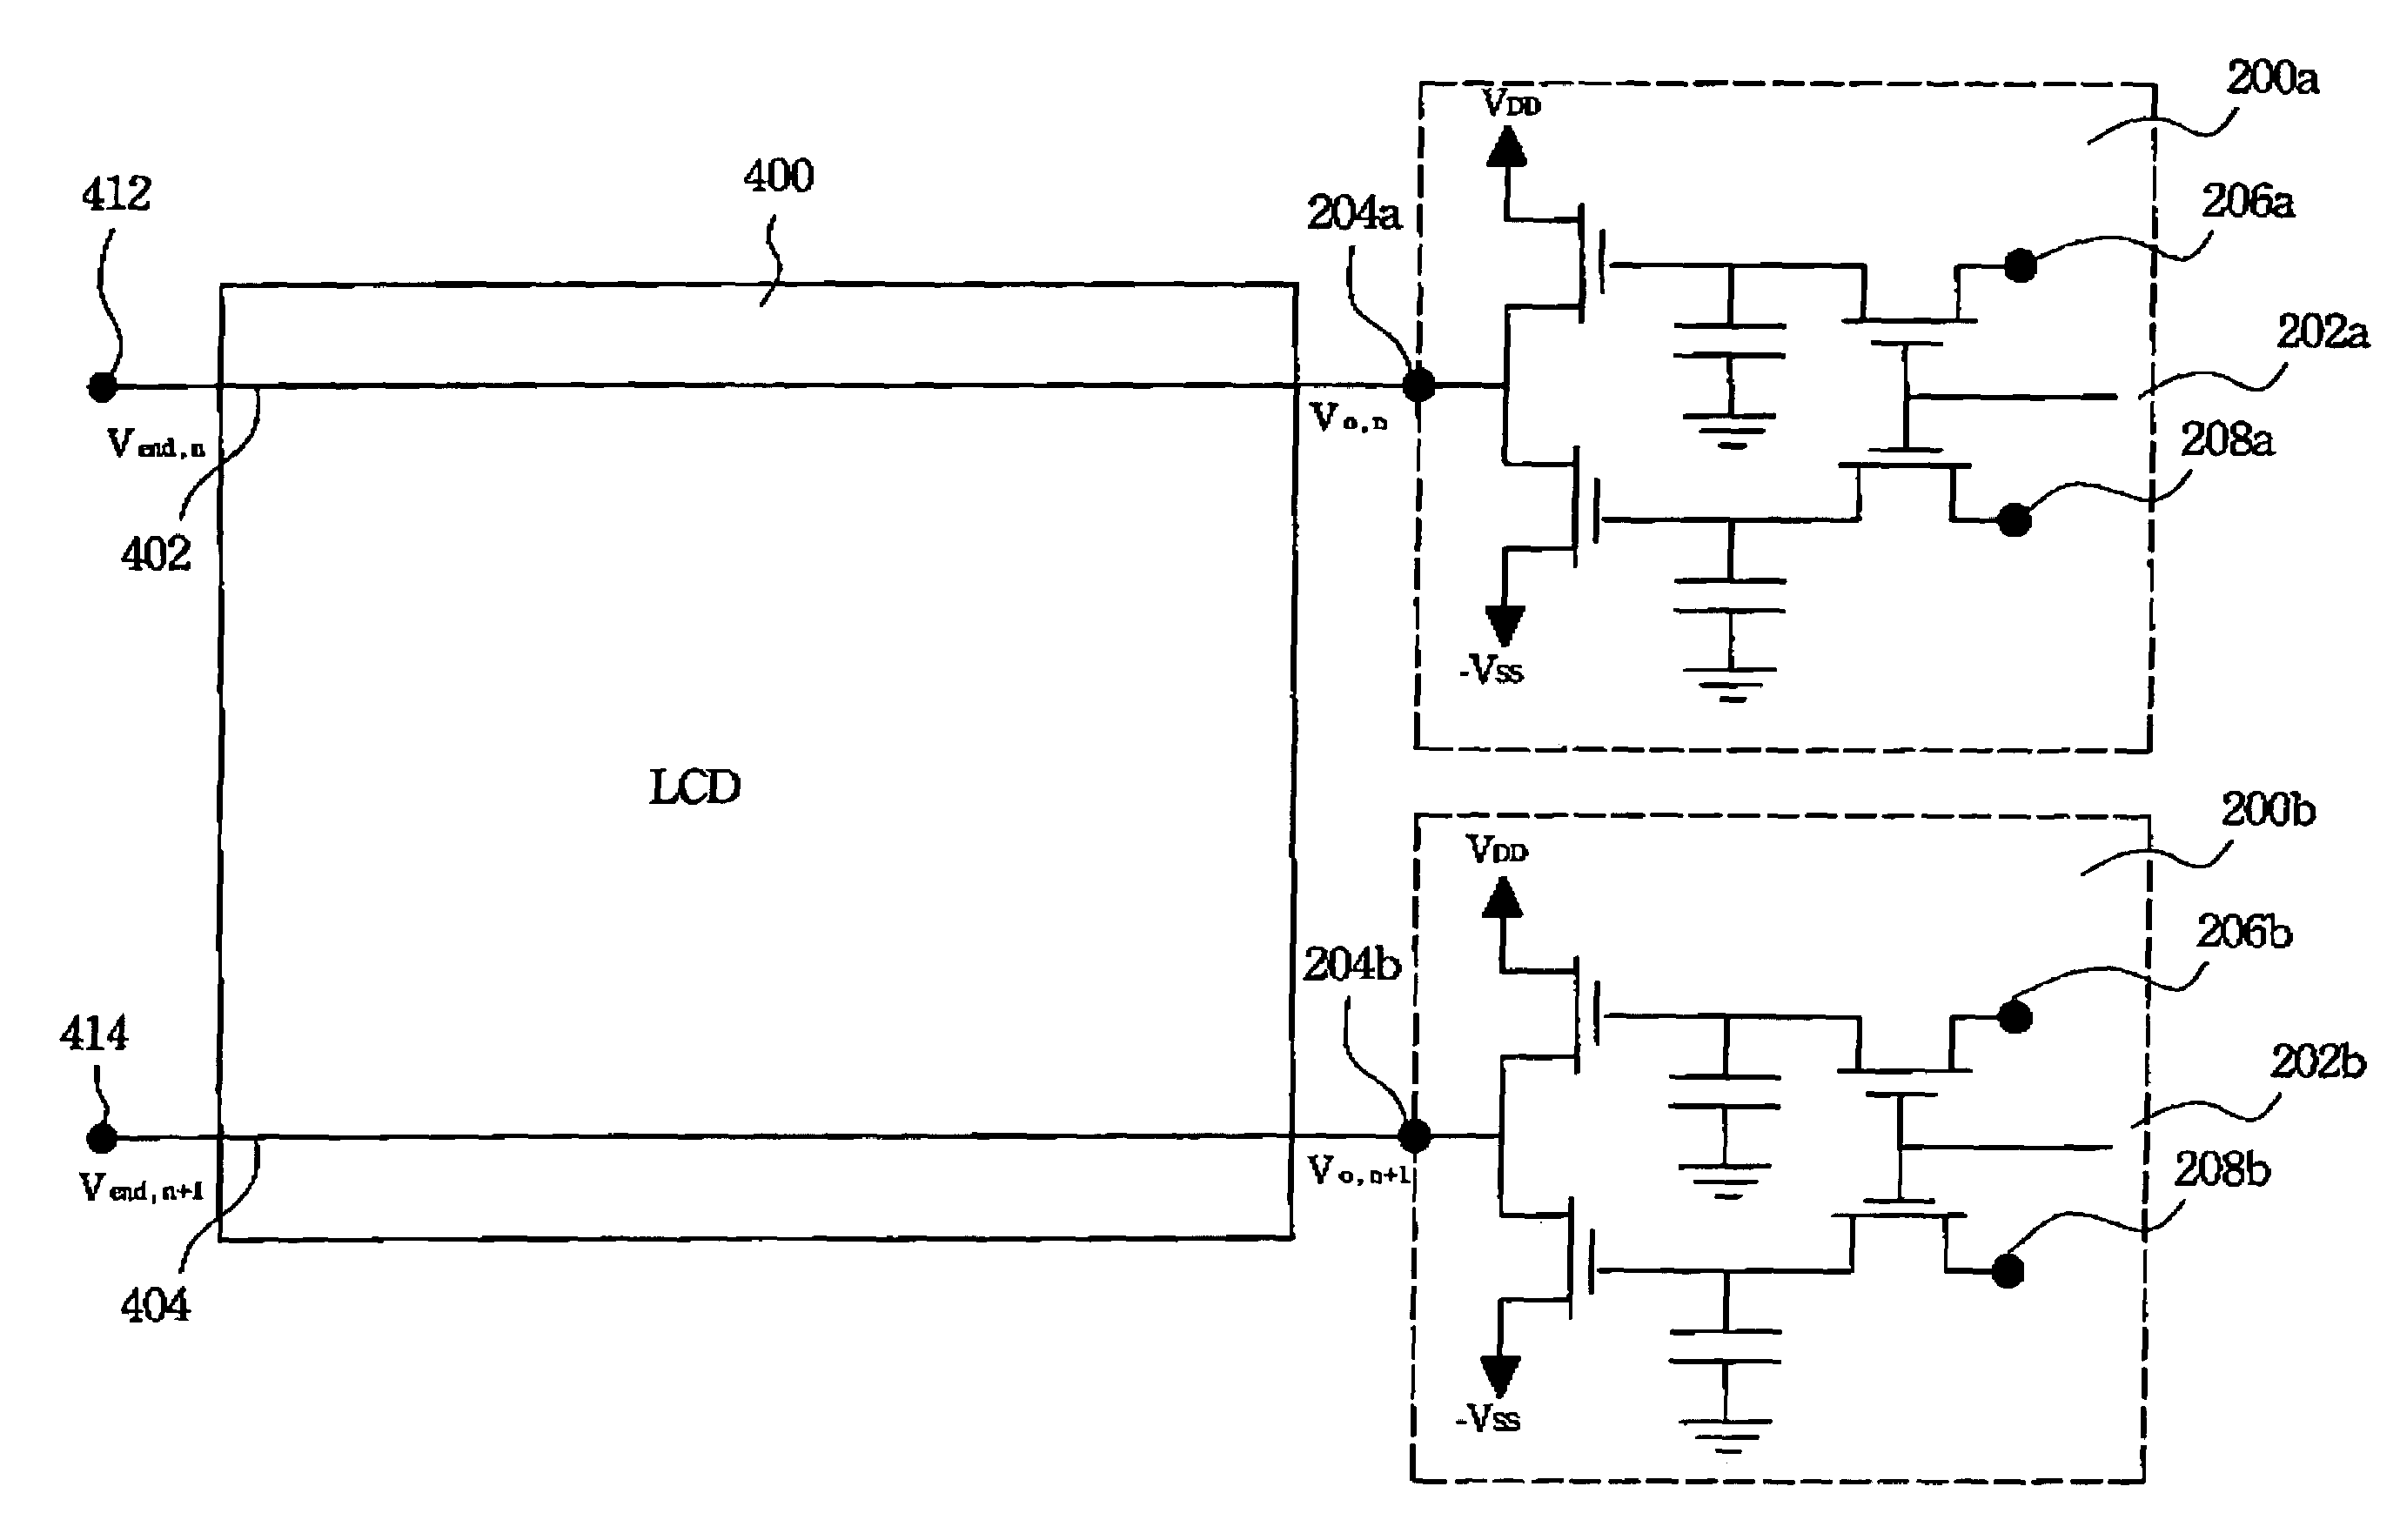 Control circuit for a common line